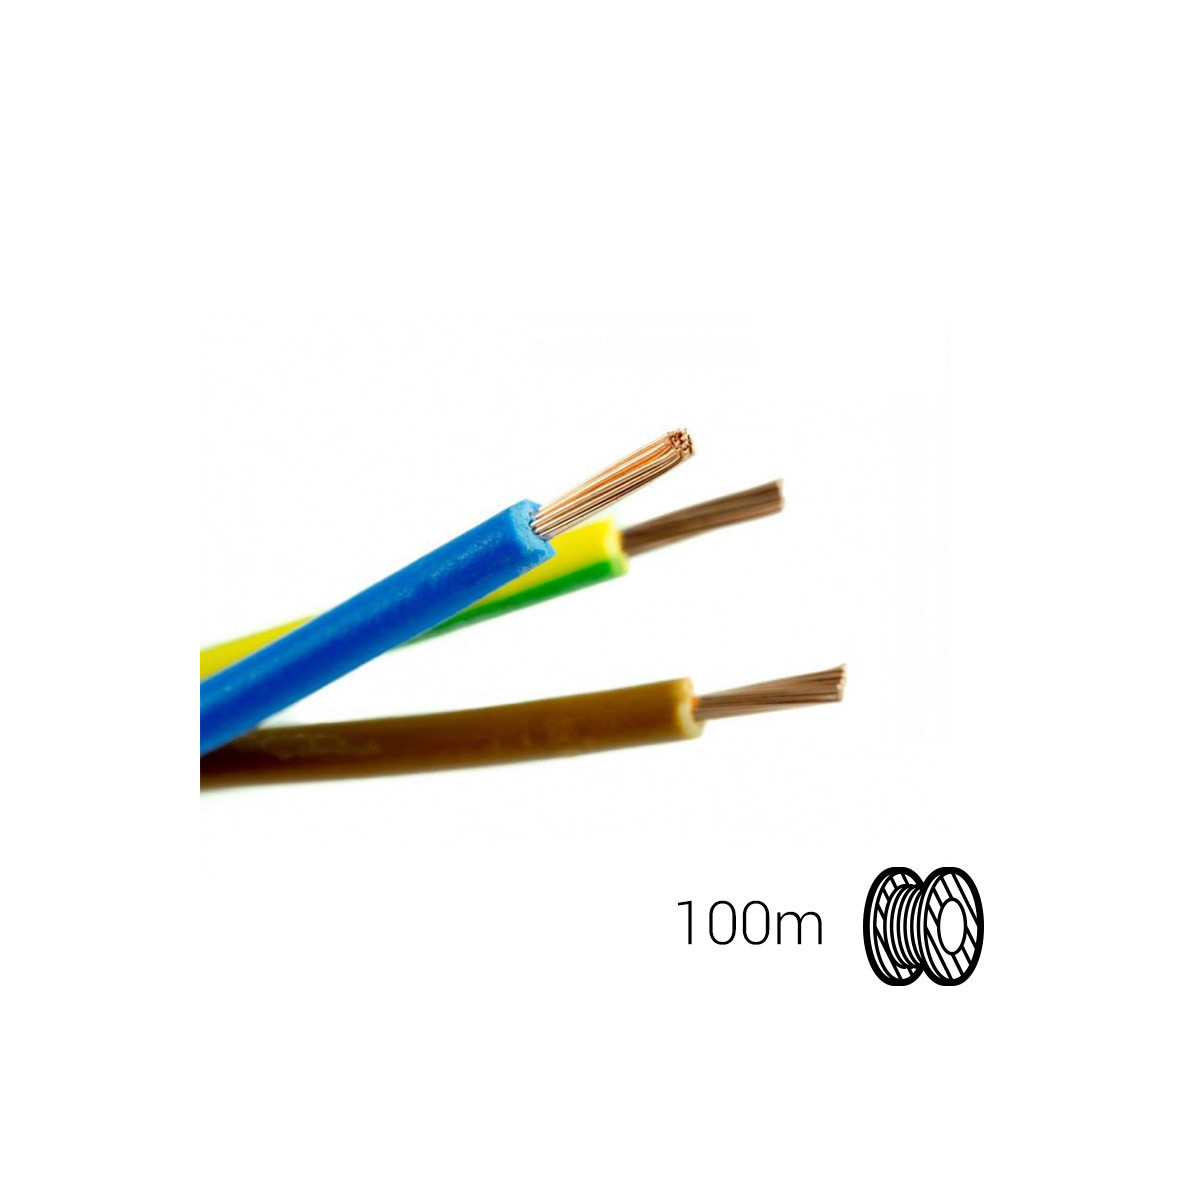 Halogen-free cable 2,5mm² H07Z1-K 100m